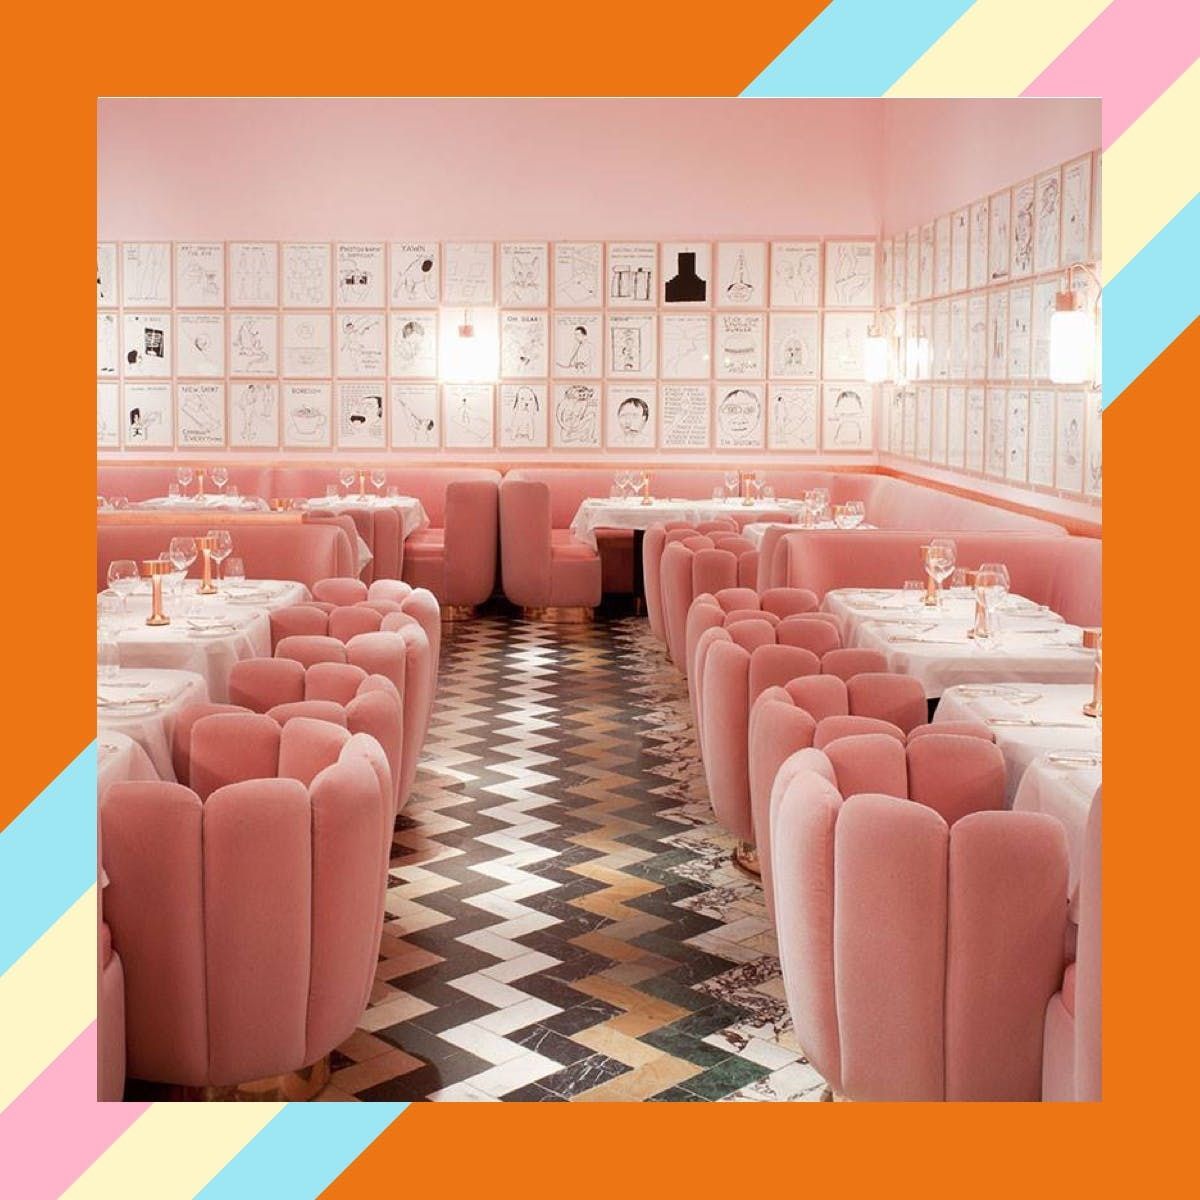 14 Trendy Places Where You Should Have Your Next Birthday Party, According to Celebs